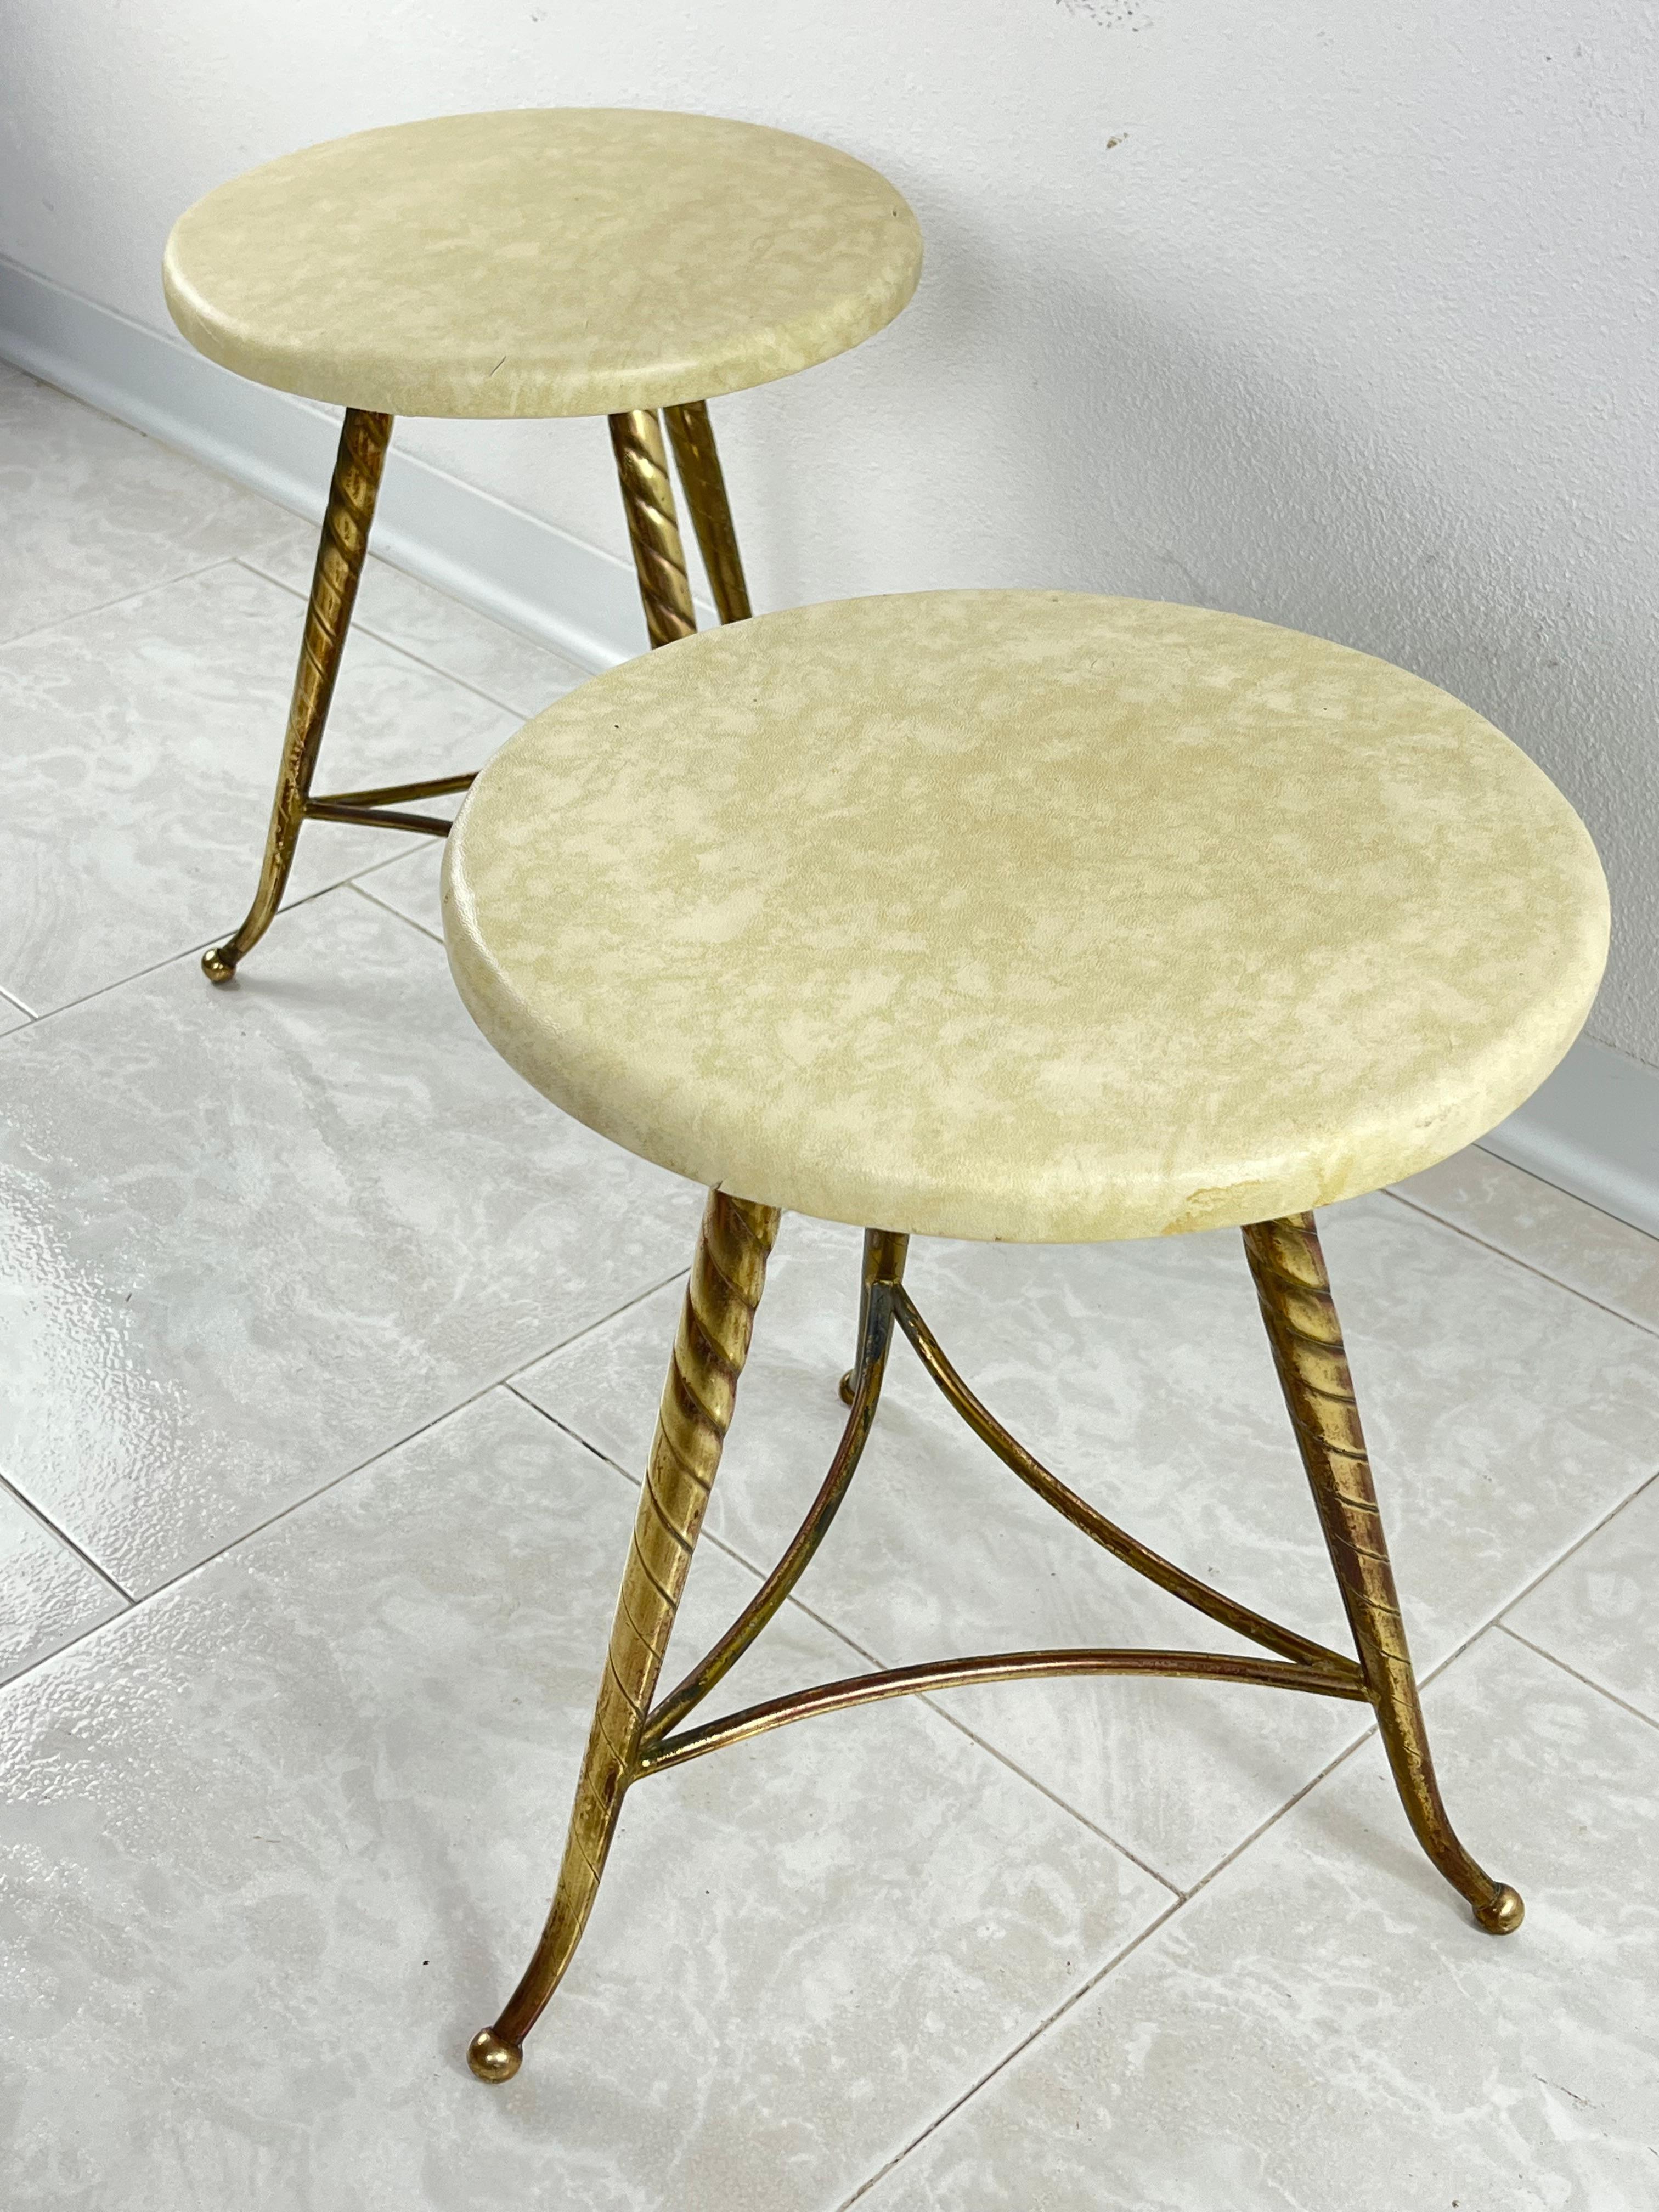 Set of 2 Mid-Century Brass Stools Attributed to Paolo Buffa 1950s For Sale 2